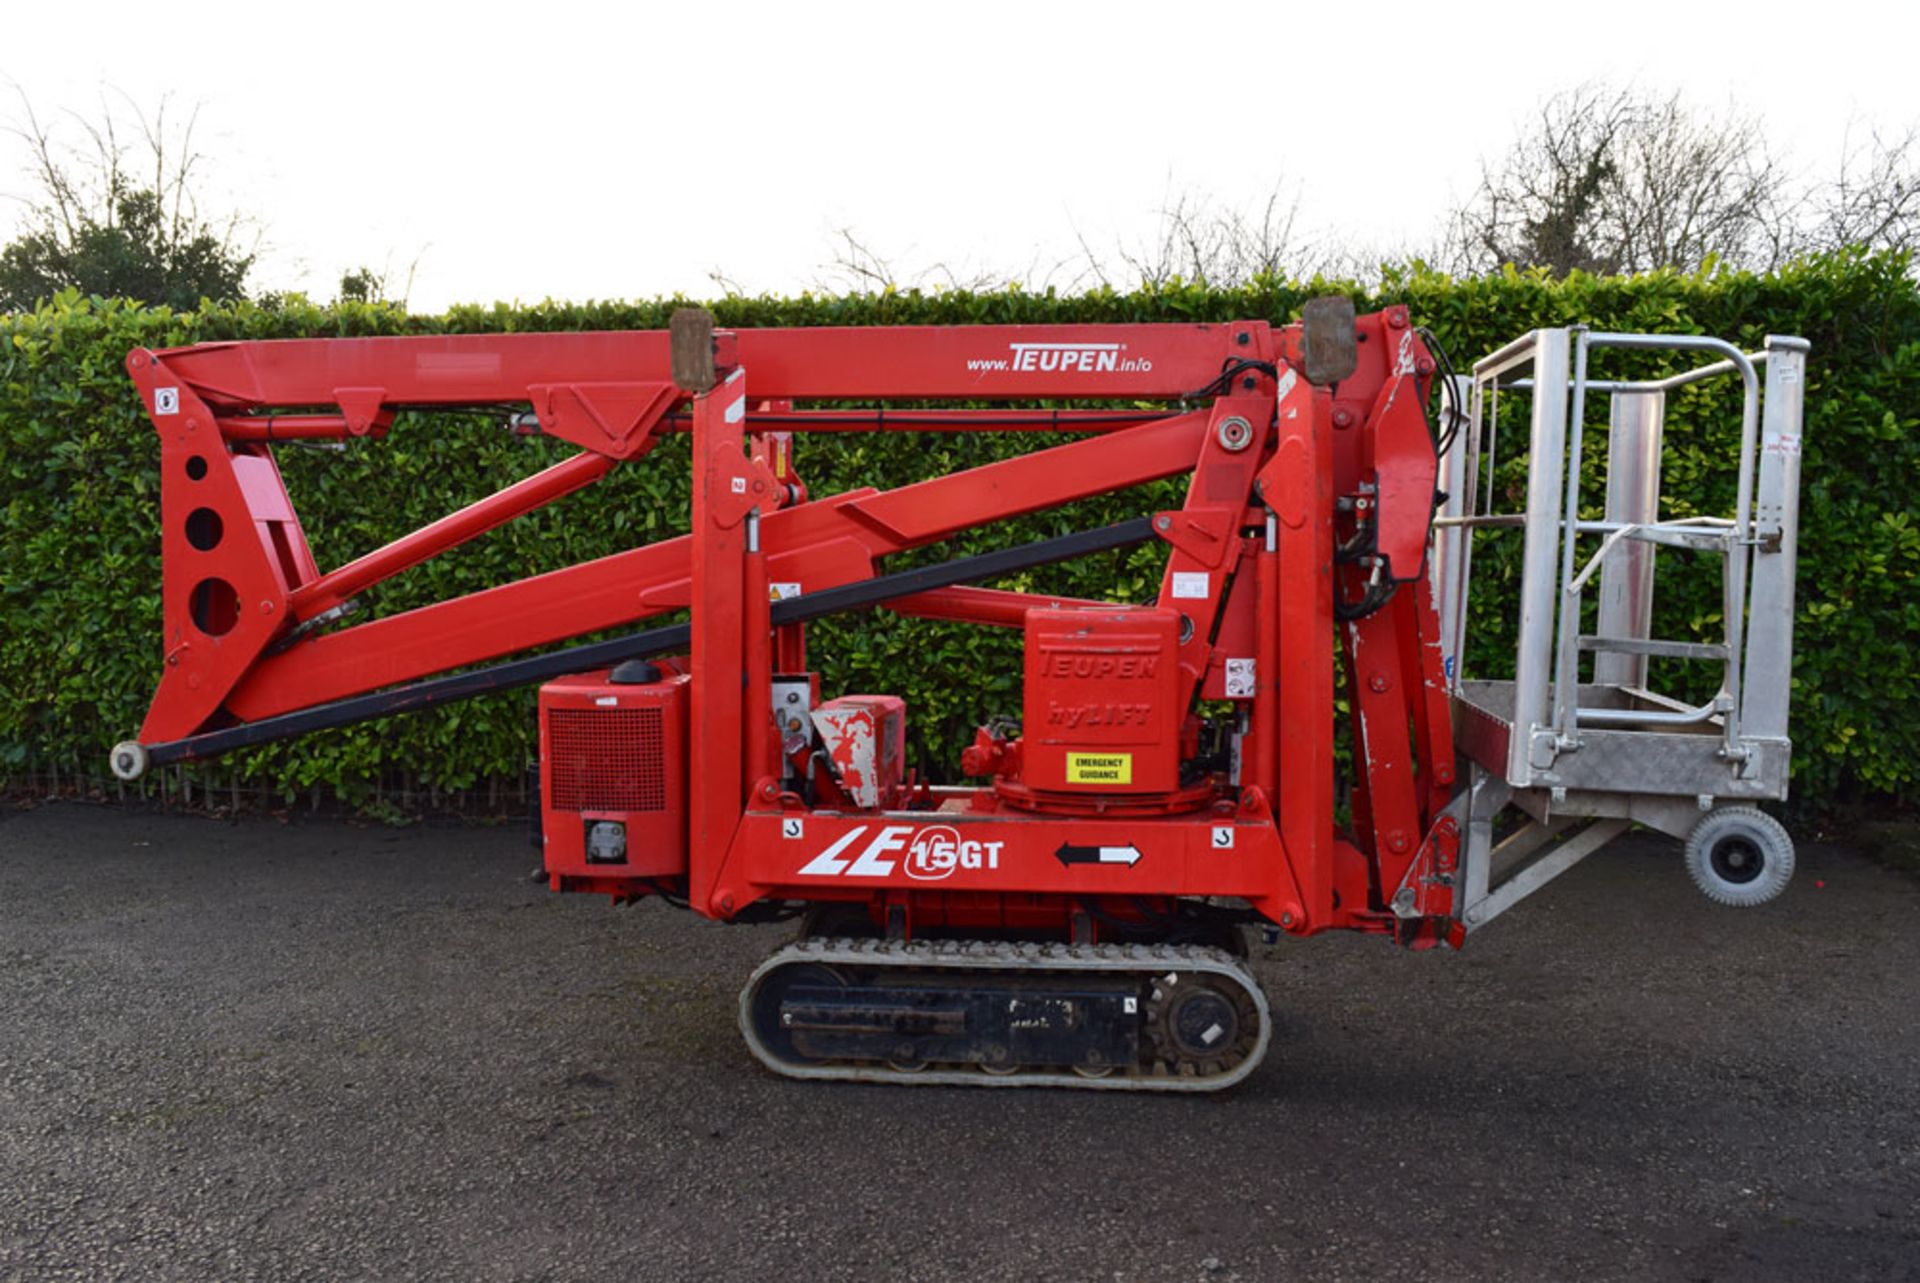 2007 Teupen Leo 15GT Tracked 15 Meter Access Lift - Image 3 of 7